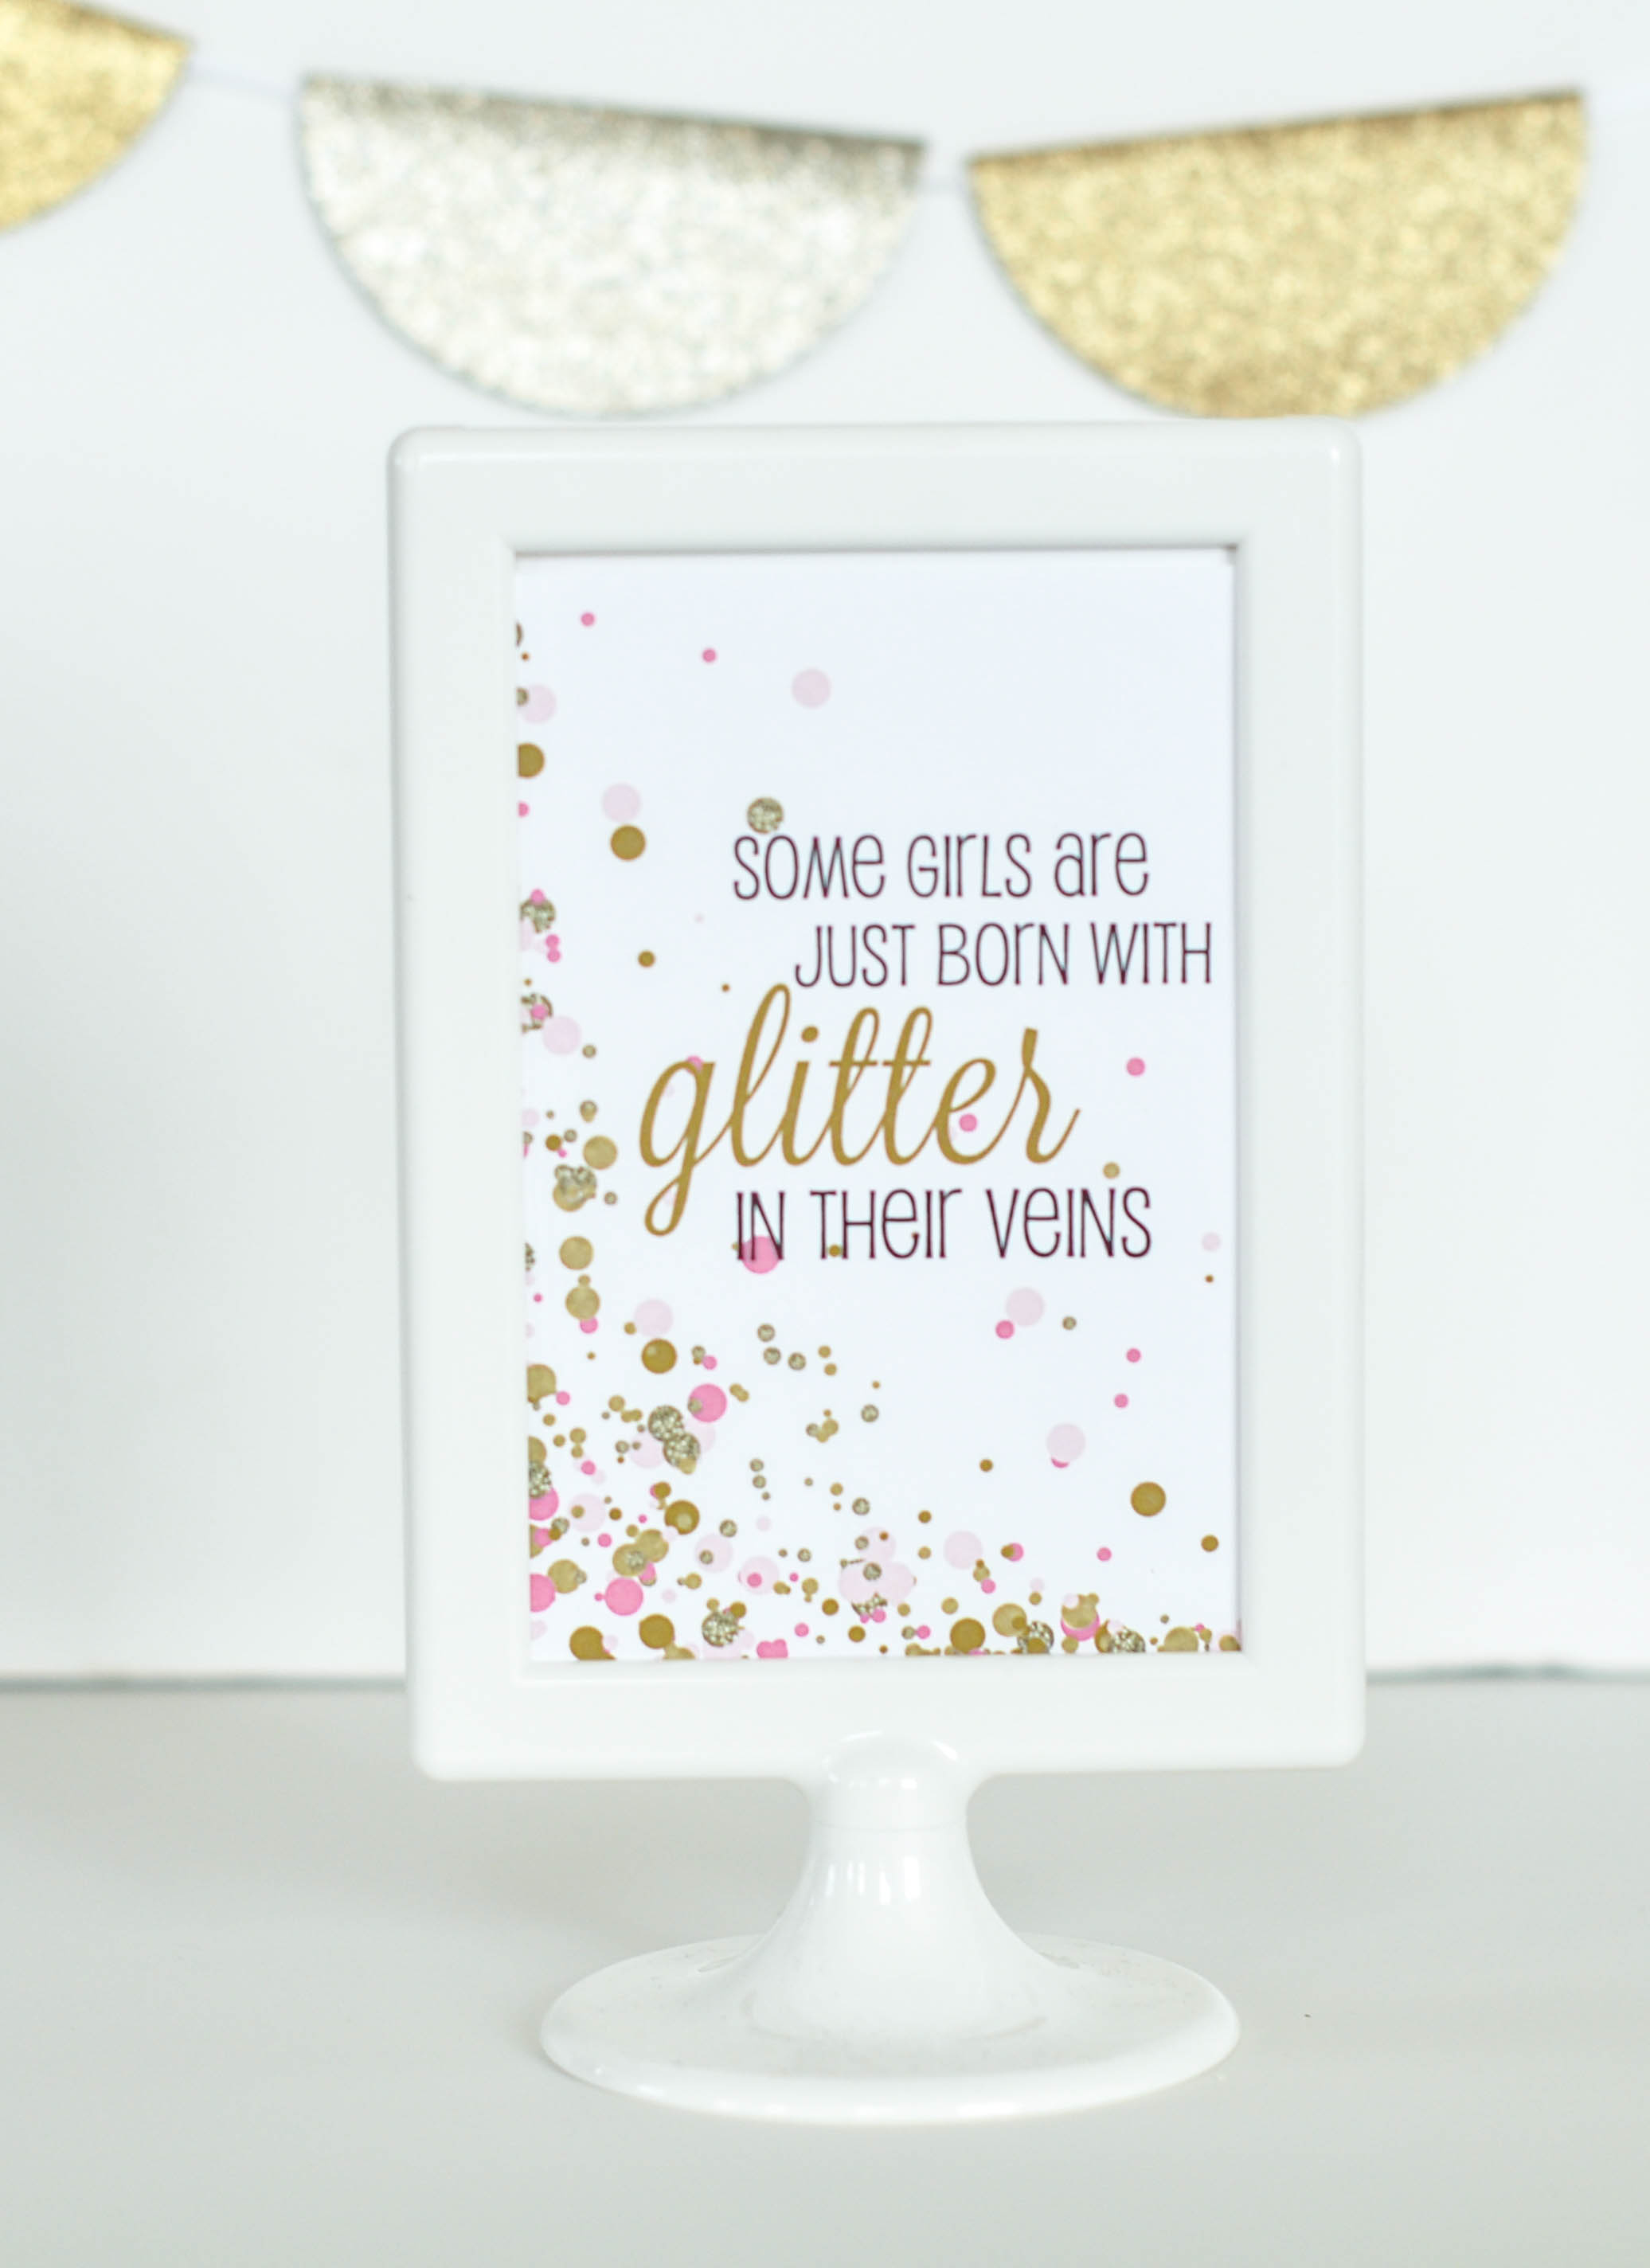 Free &amp;quot;cue The Confetti&amp;quot; Baby Shower Printable Signs - - Free Printable Baby Shower Table Signs